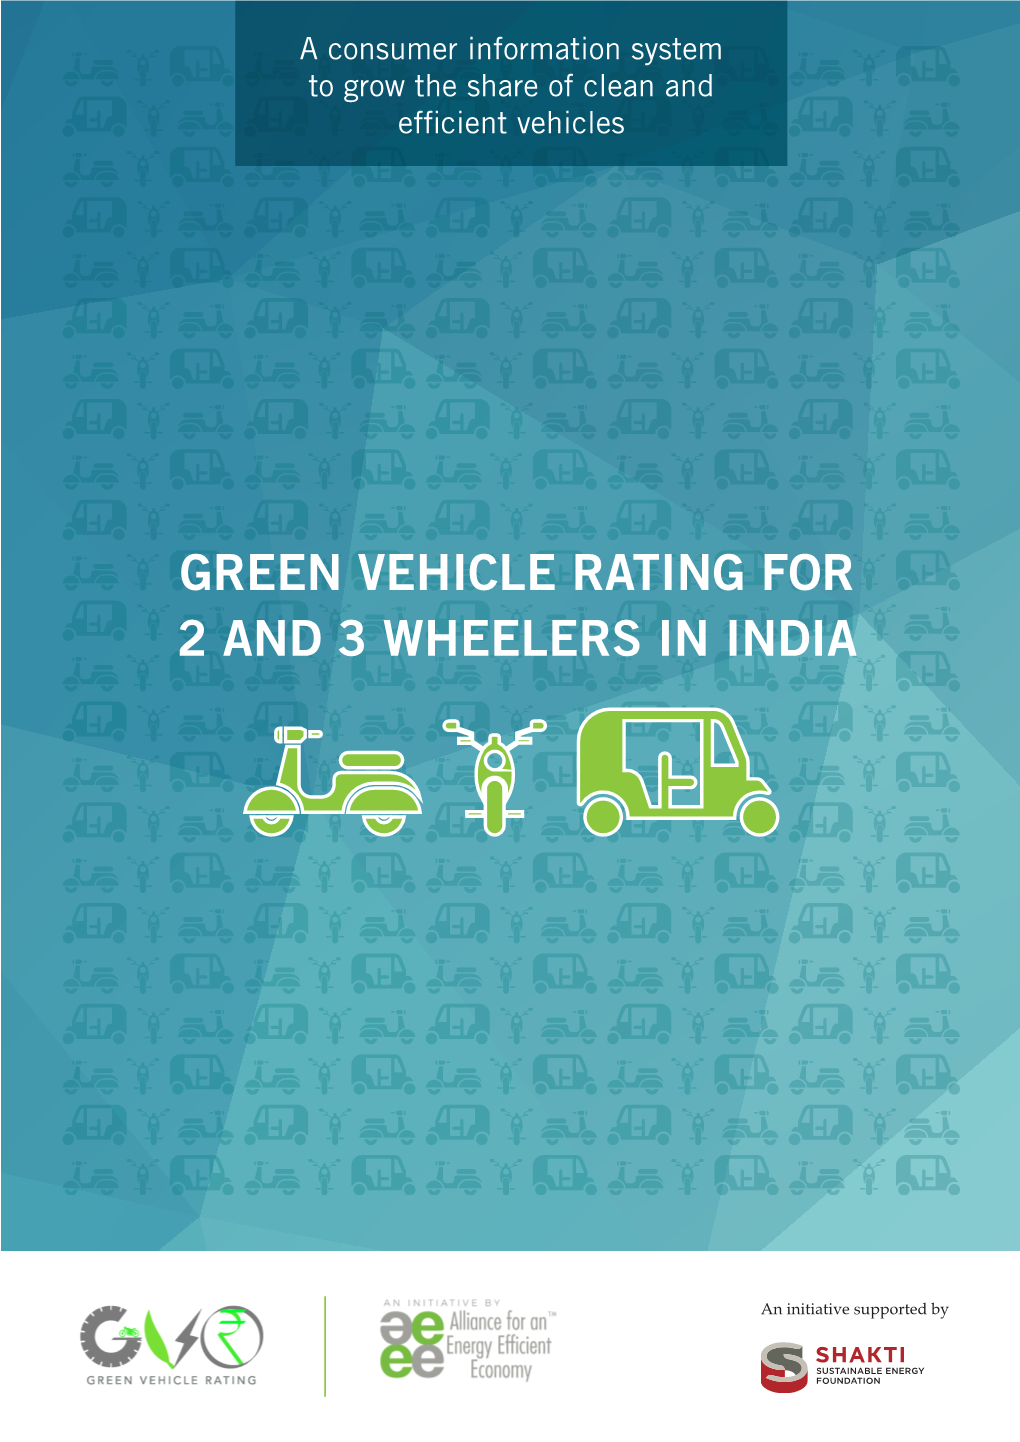 Green Vehicle Rating for 2 and 3 Wheelers in India